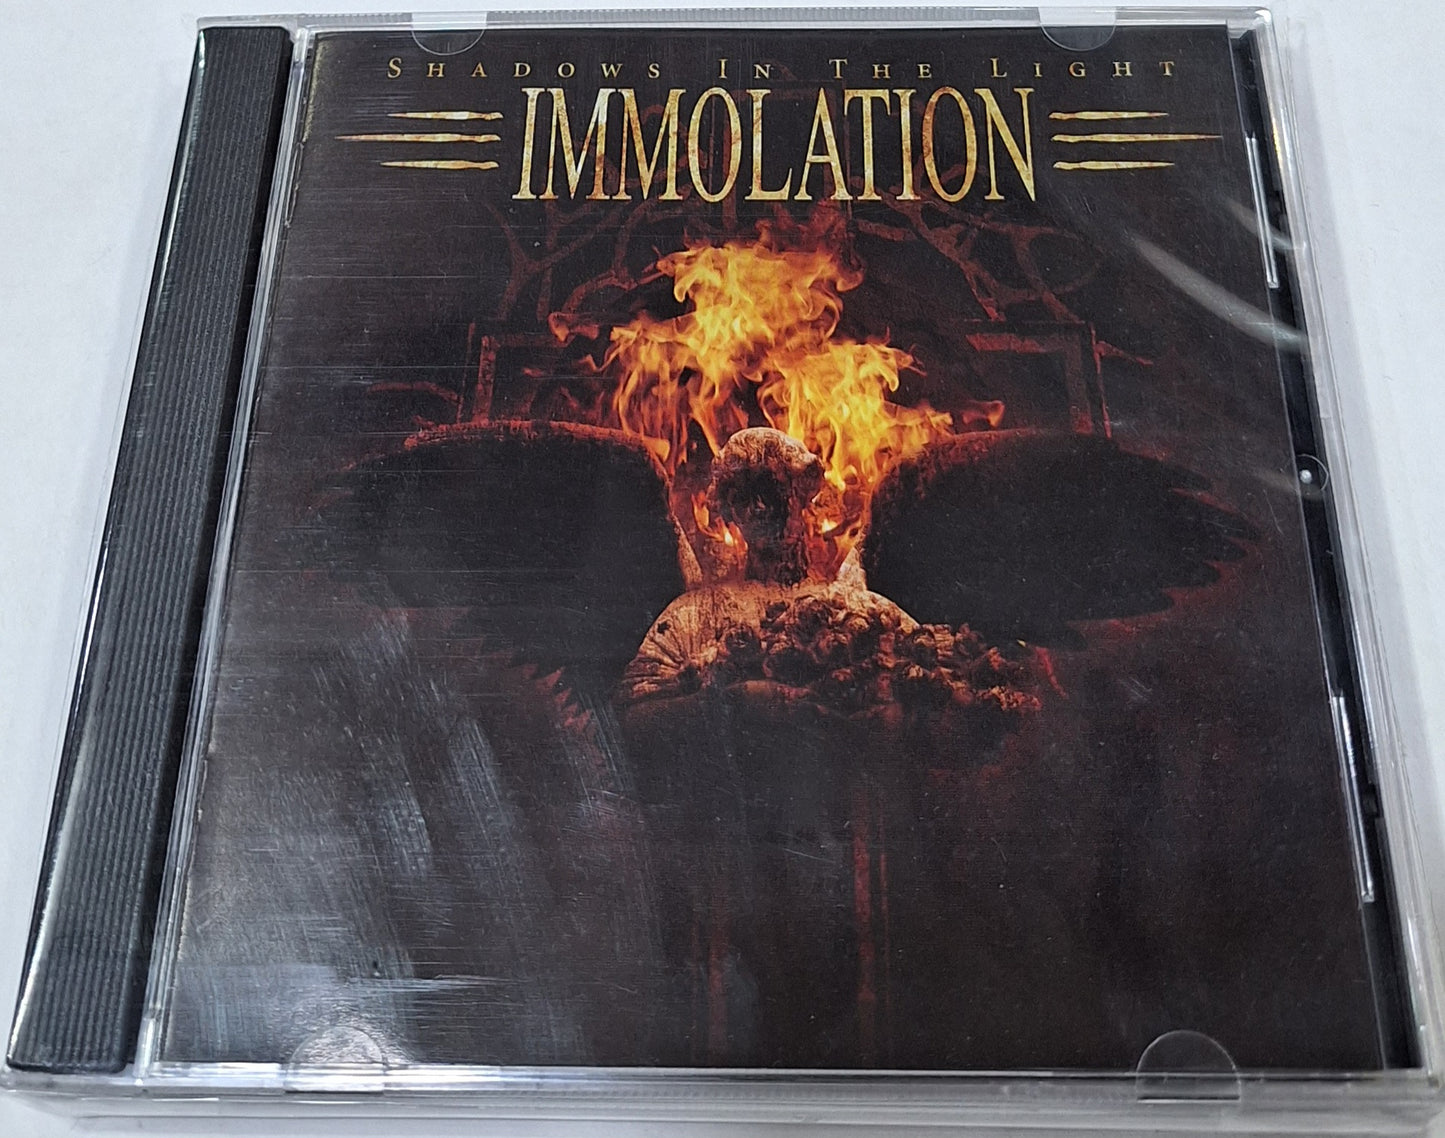 IMMOLATION - SHADOWS IN THE LIGHT  CD